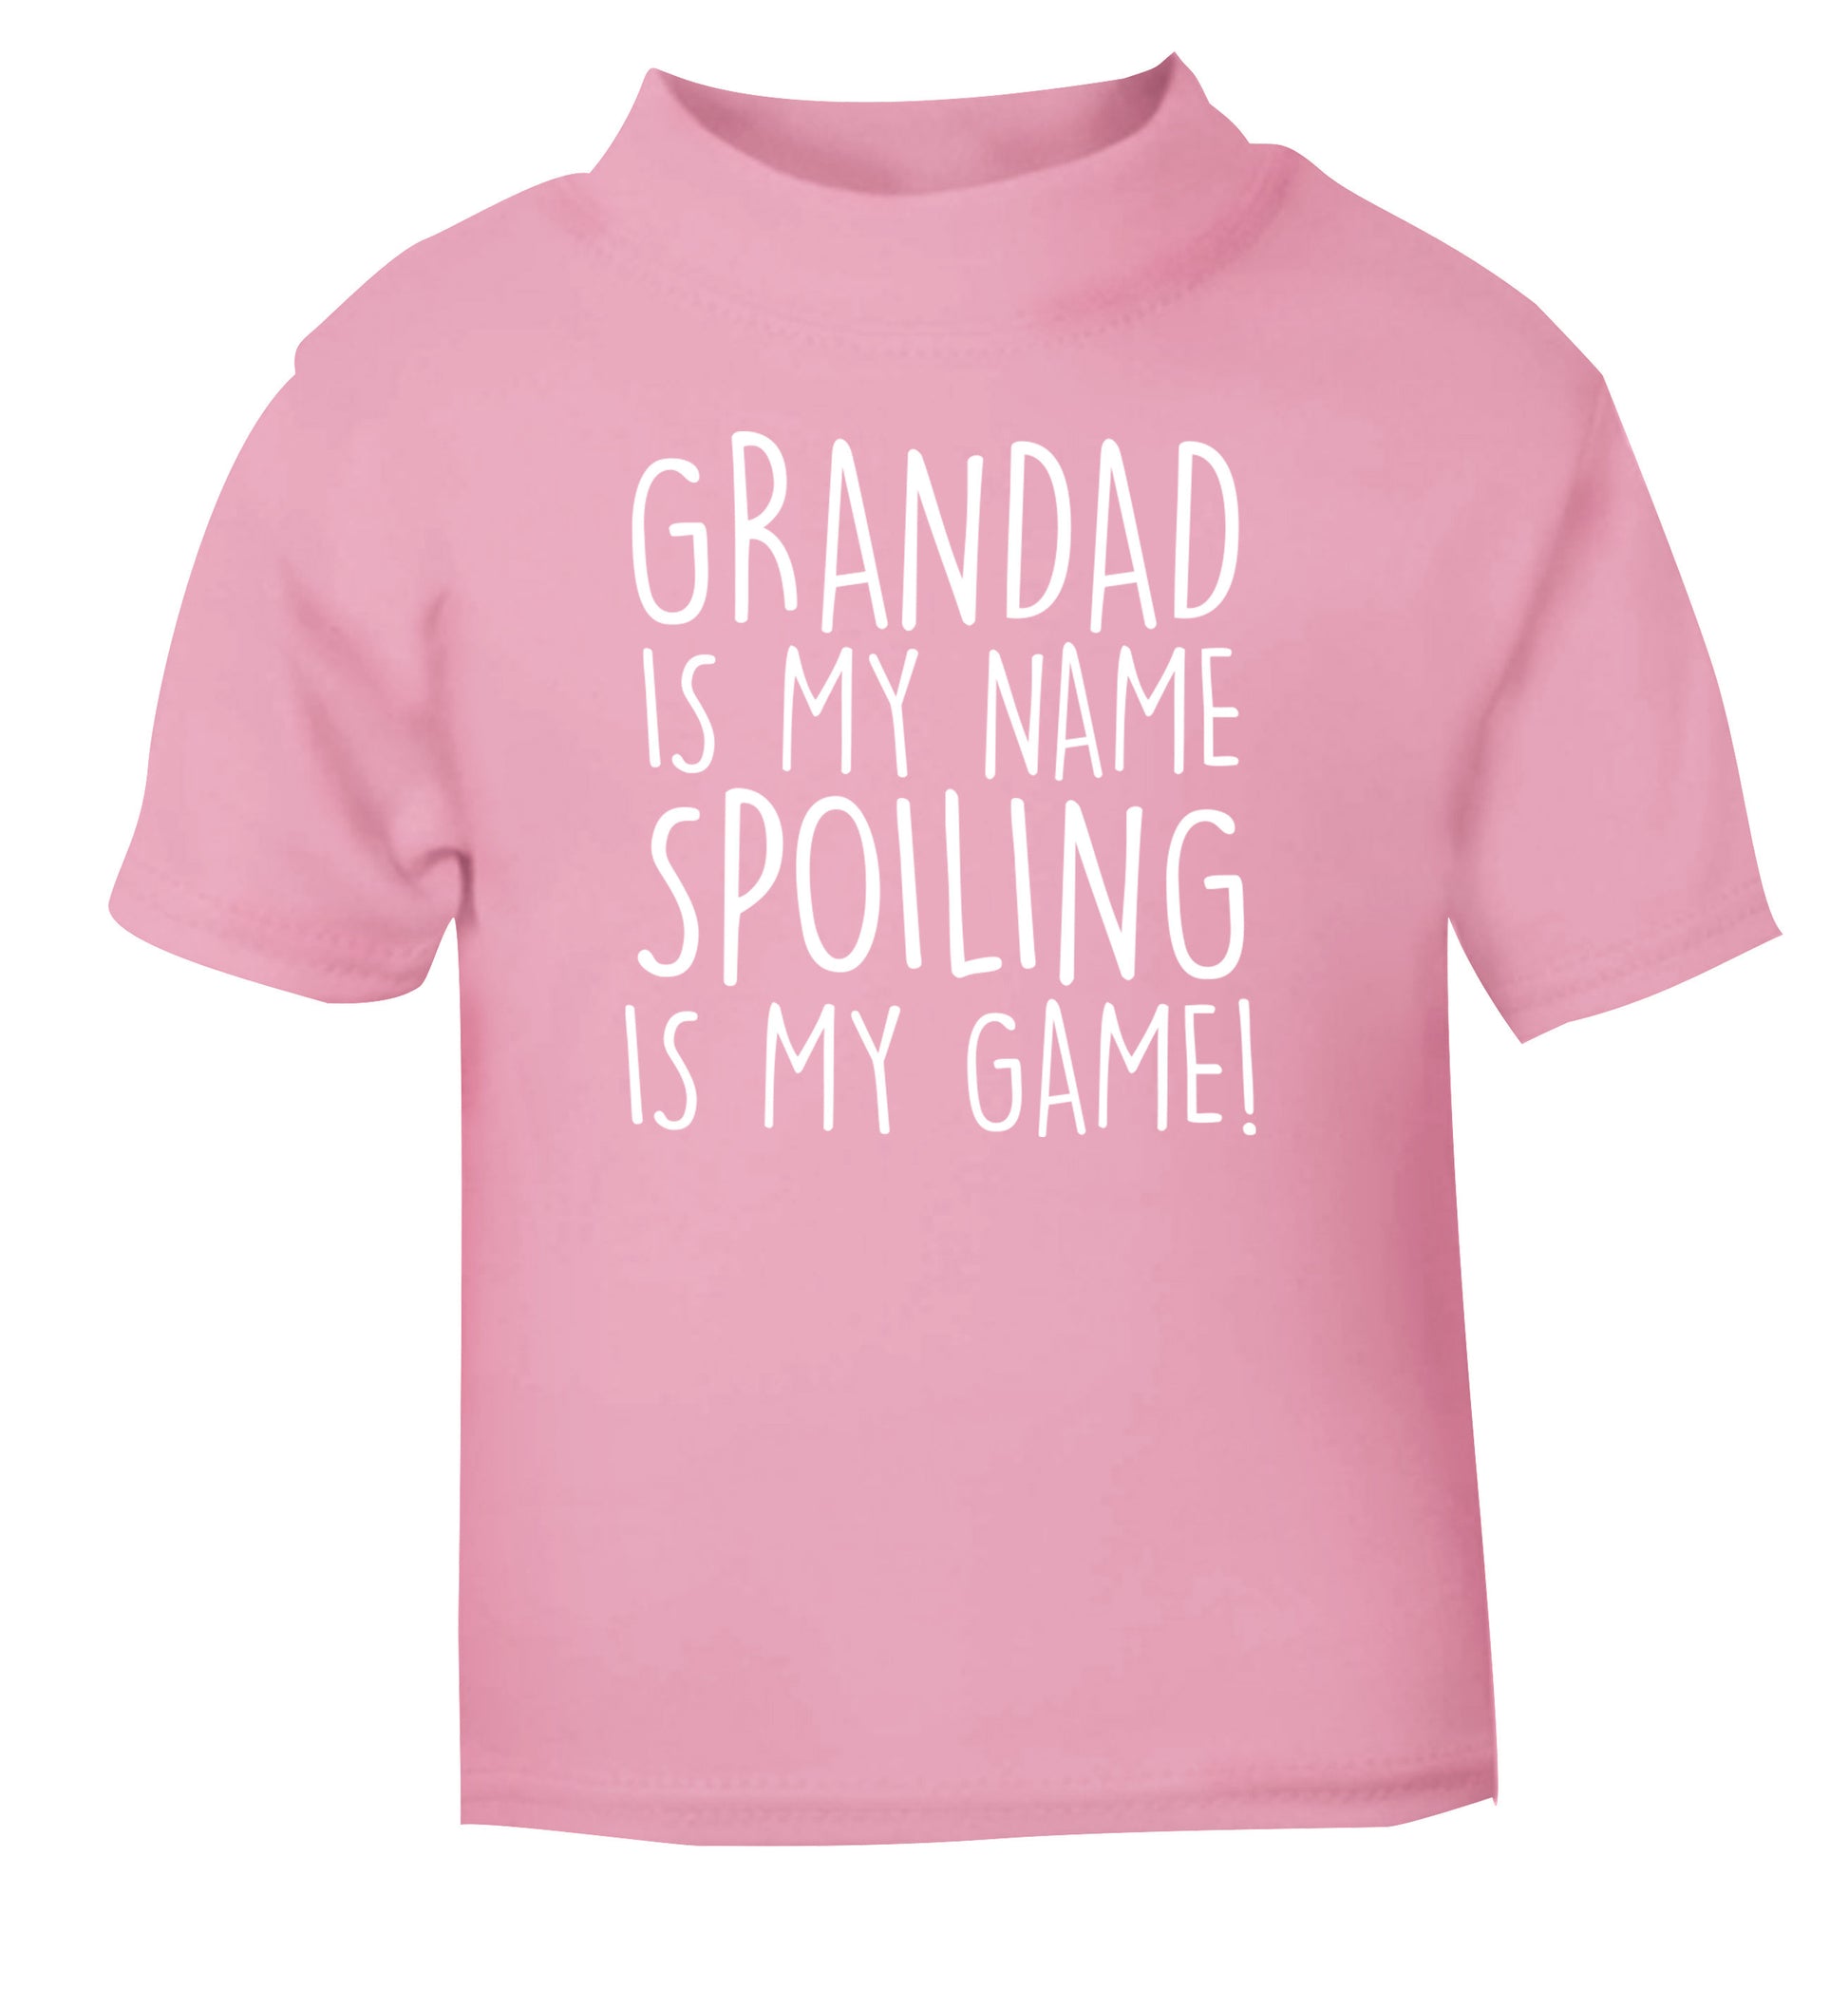 Grandad is my name, spoiling is my game light pink Baby Toddler Tshirt 2 Years